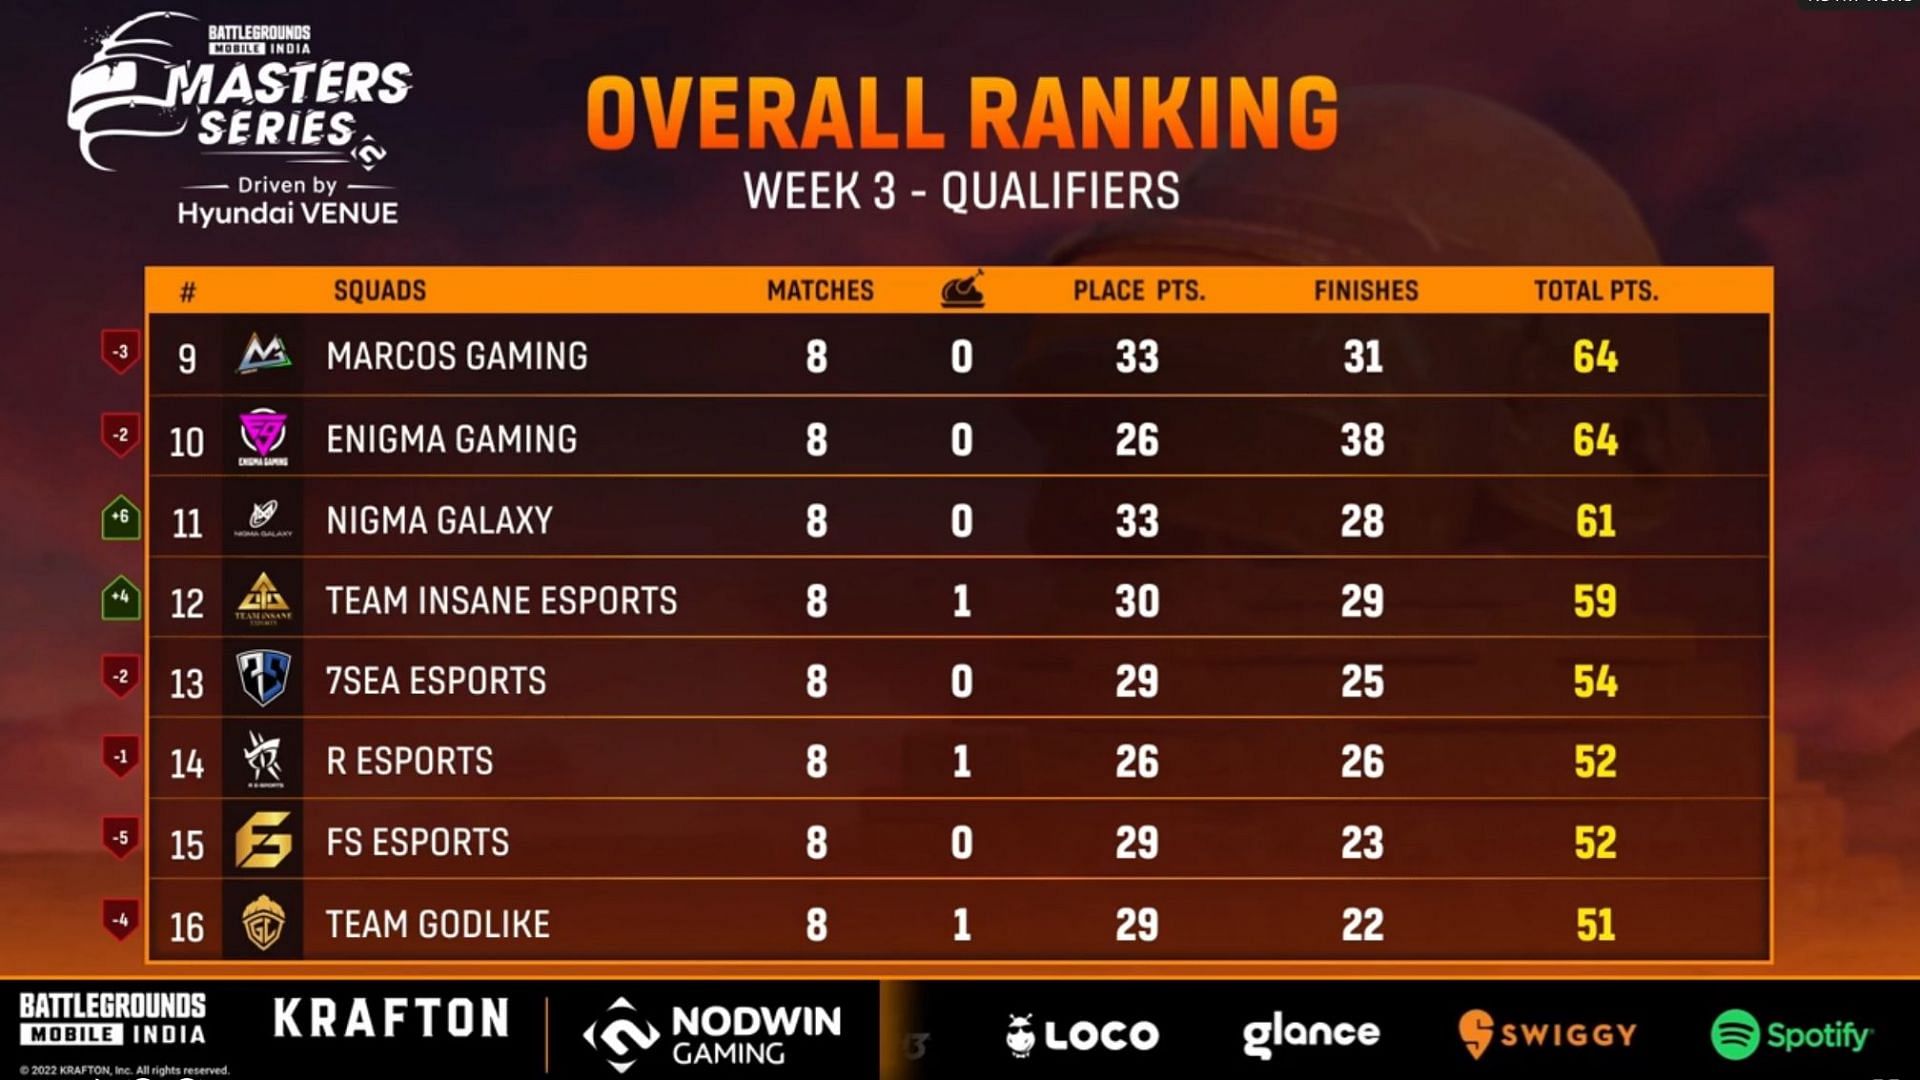 Top 16 teams qualified for the BGMI Masters Series Week 3 Finals (Image via Loco)